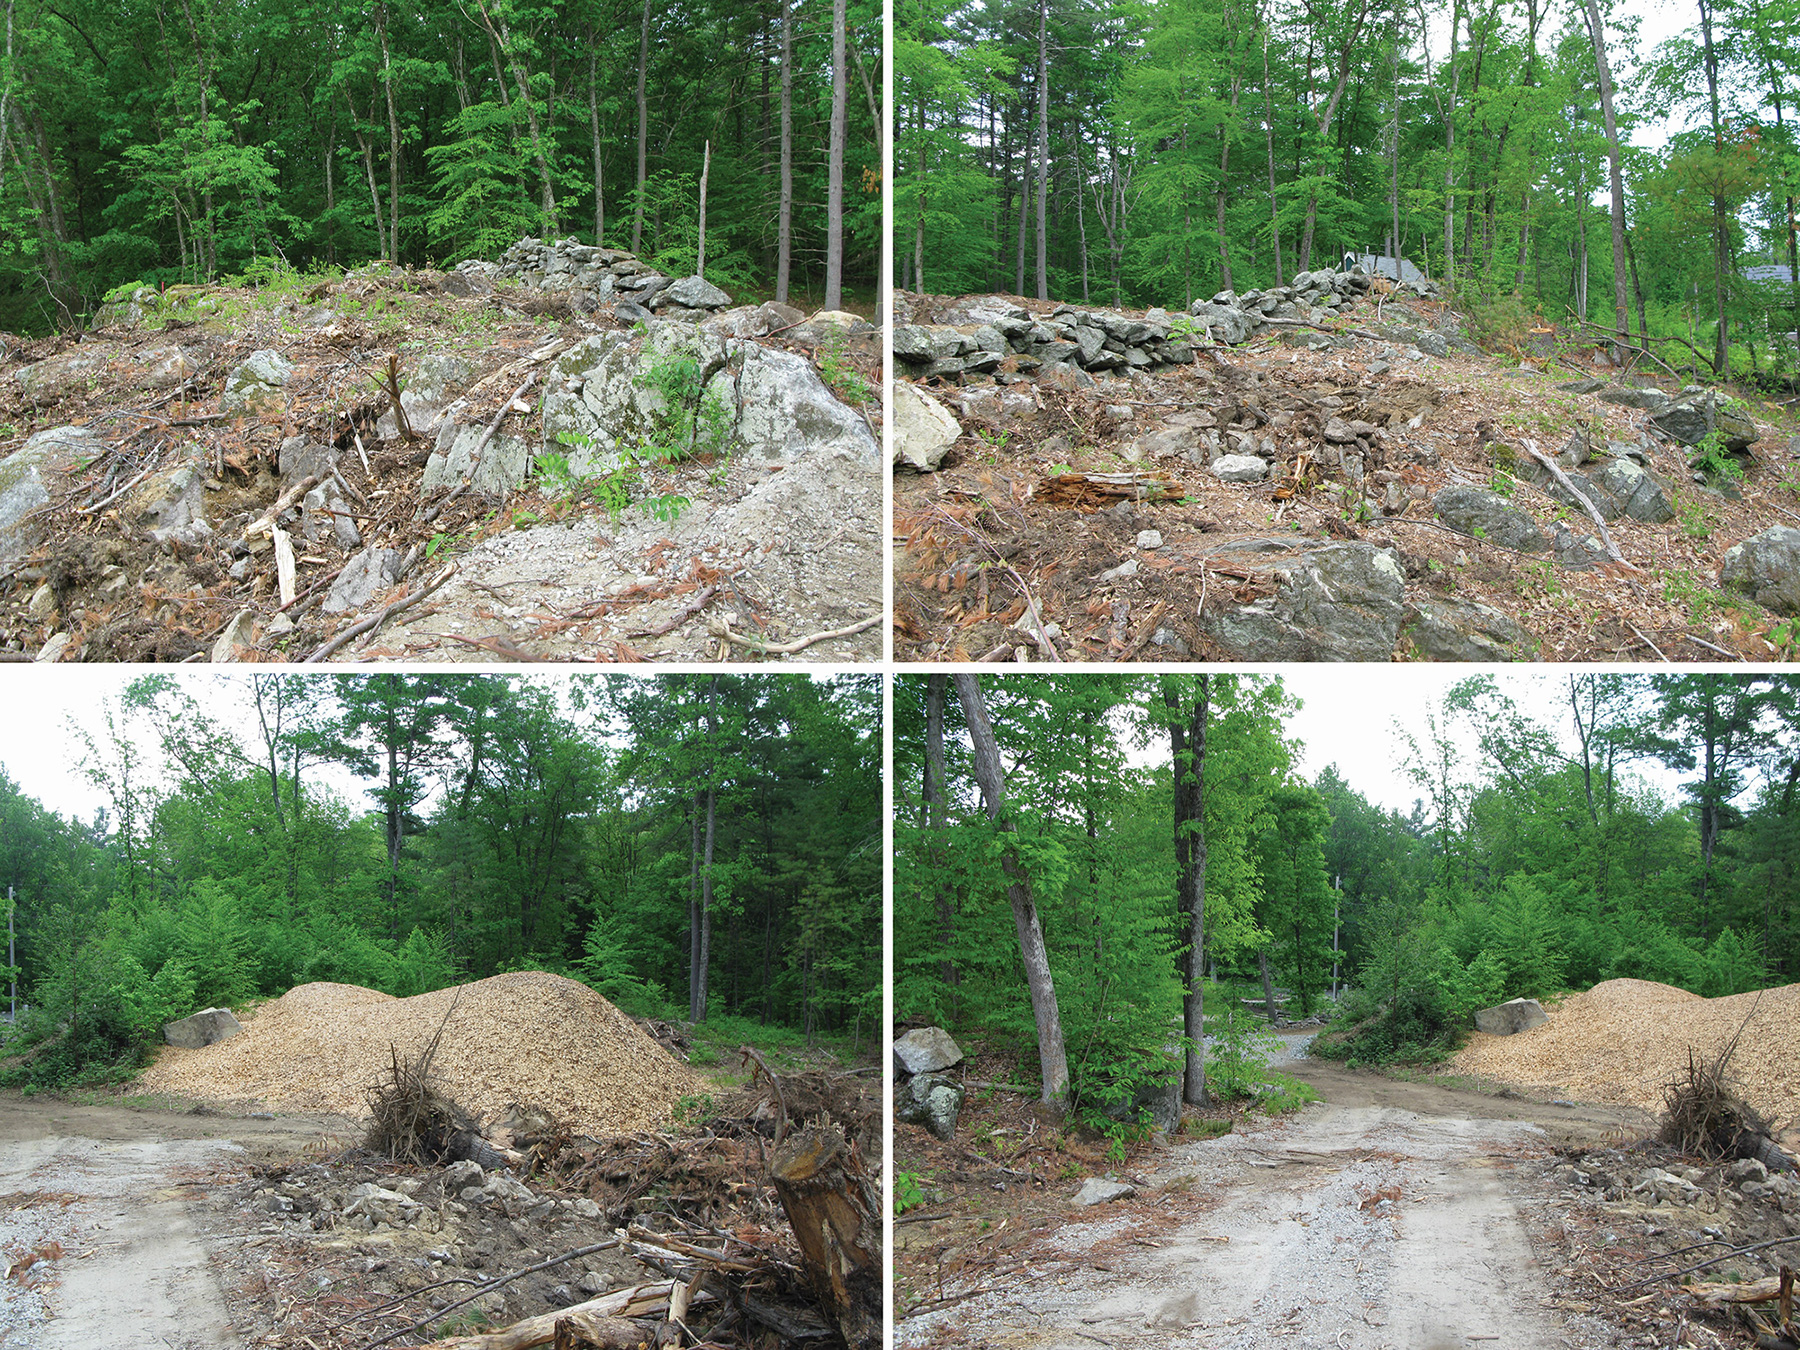 Bark chips stored for paths, condition of site during construction and extent of work to get it cleaned up and ready for erosion-control seed mix, a mix of over 20 species.